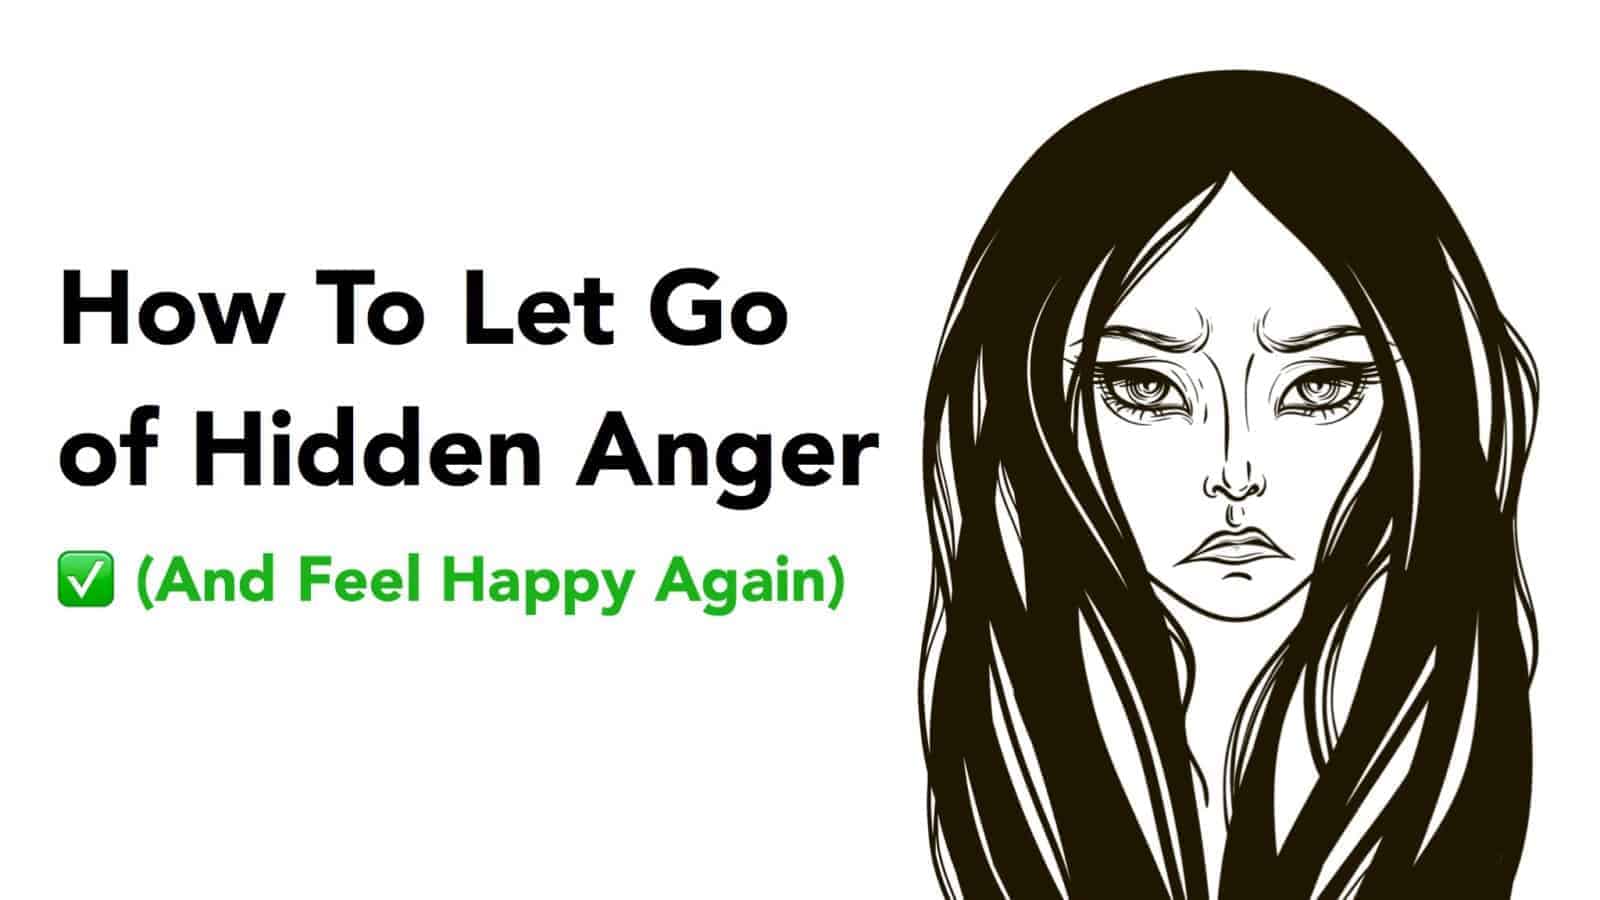 How To Let Go of Hidden Anger (And Feel Happy Again)